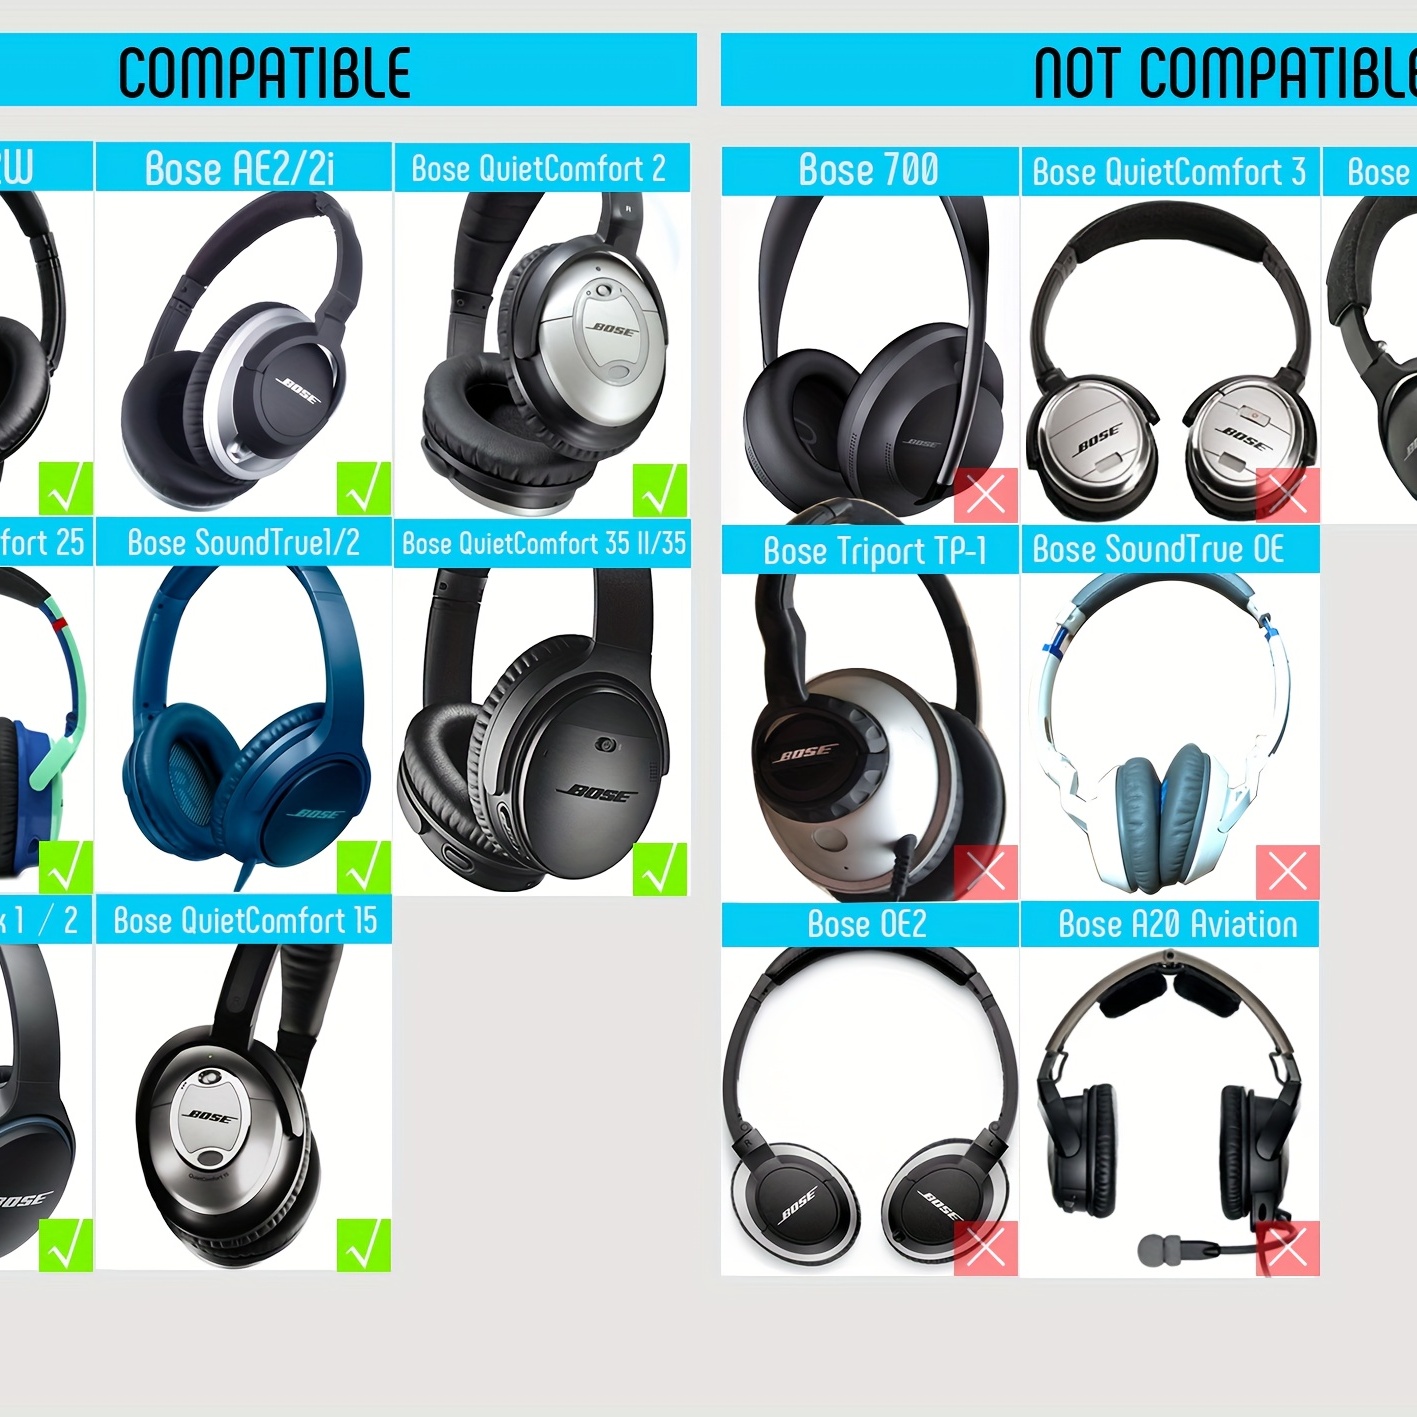 Bose QC 35 II vs. QC 25: What's the difference (and which should